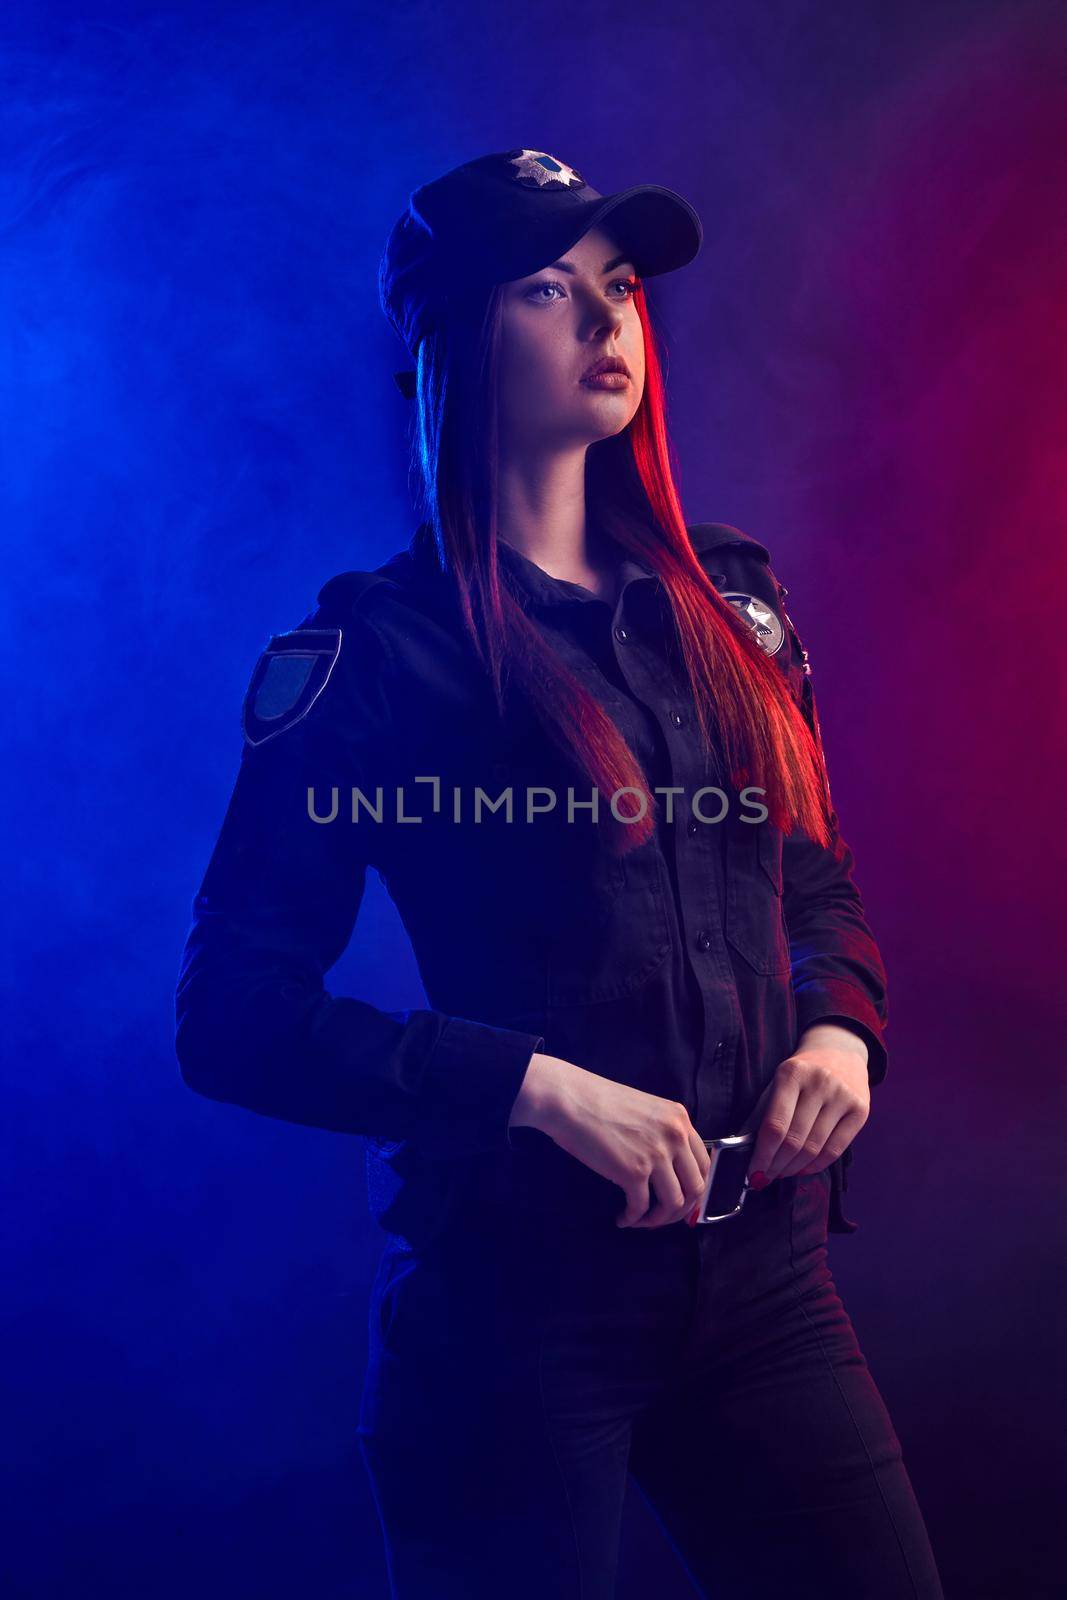 Attractive ginger girl police officer in a uniform and a cap, with bright make-up, is standing sideways, holding her belt and looking away against a black background with red and blue backlighting.